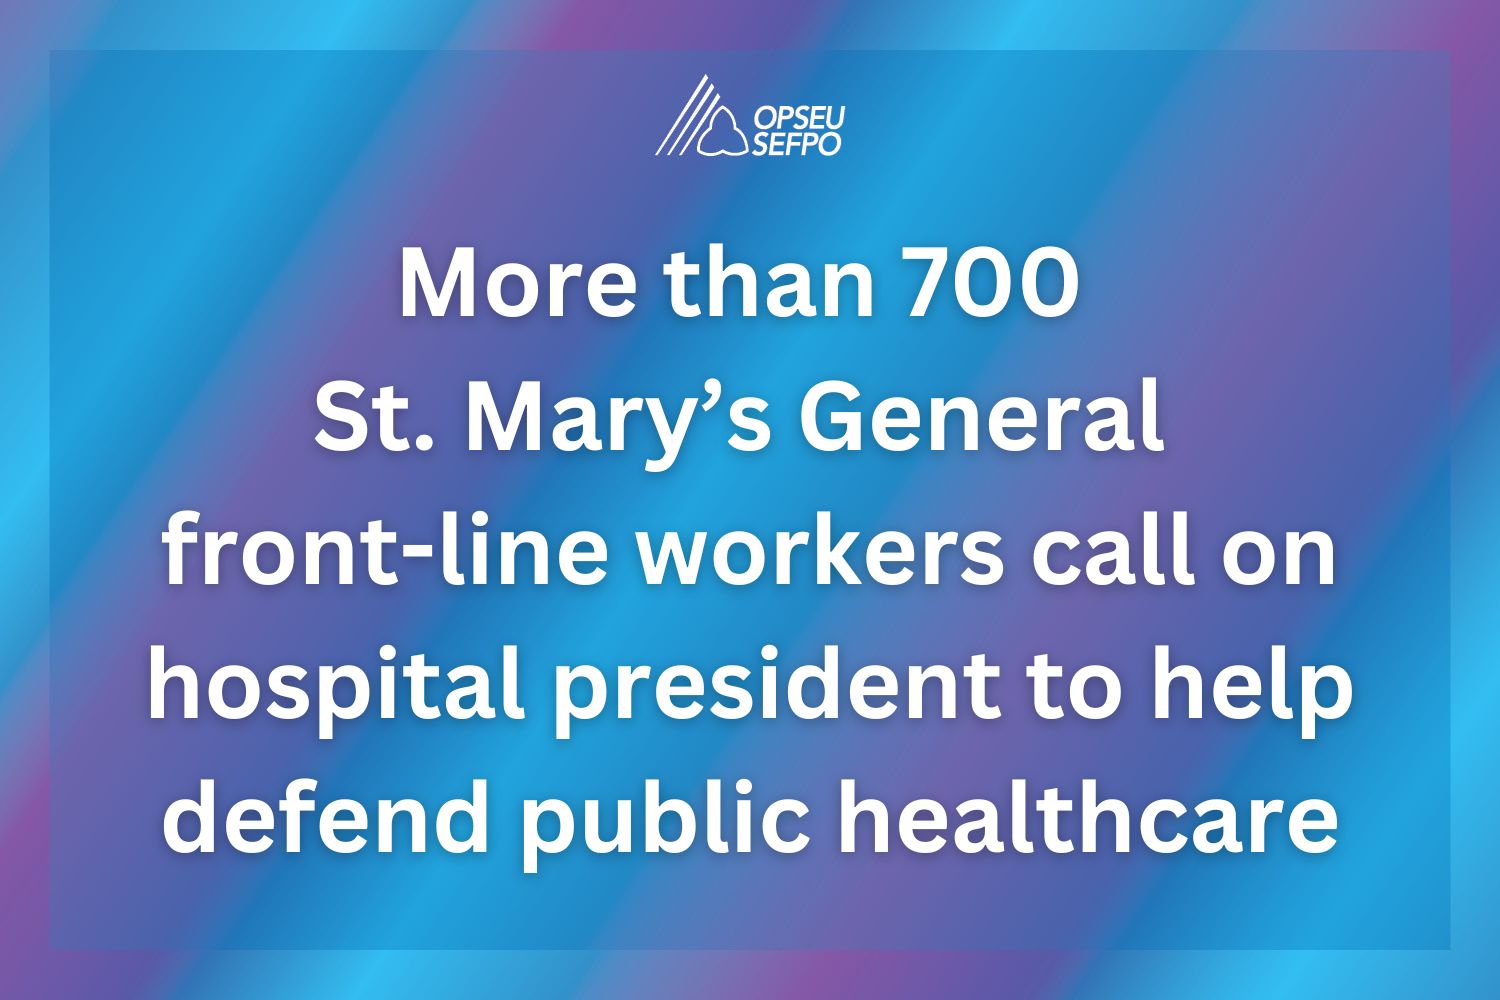 More than 700 St. Mary's General front-line workers call on hospital president to help defend public healthcare